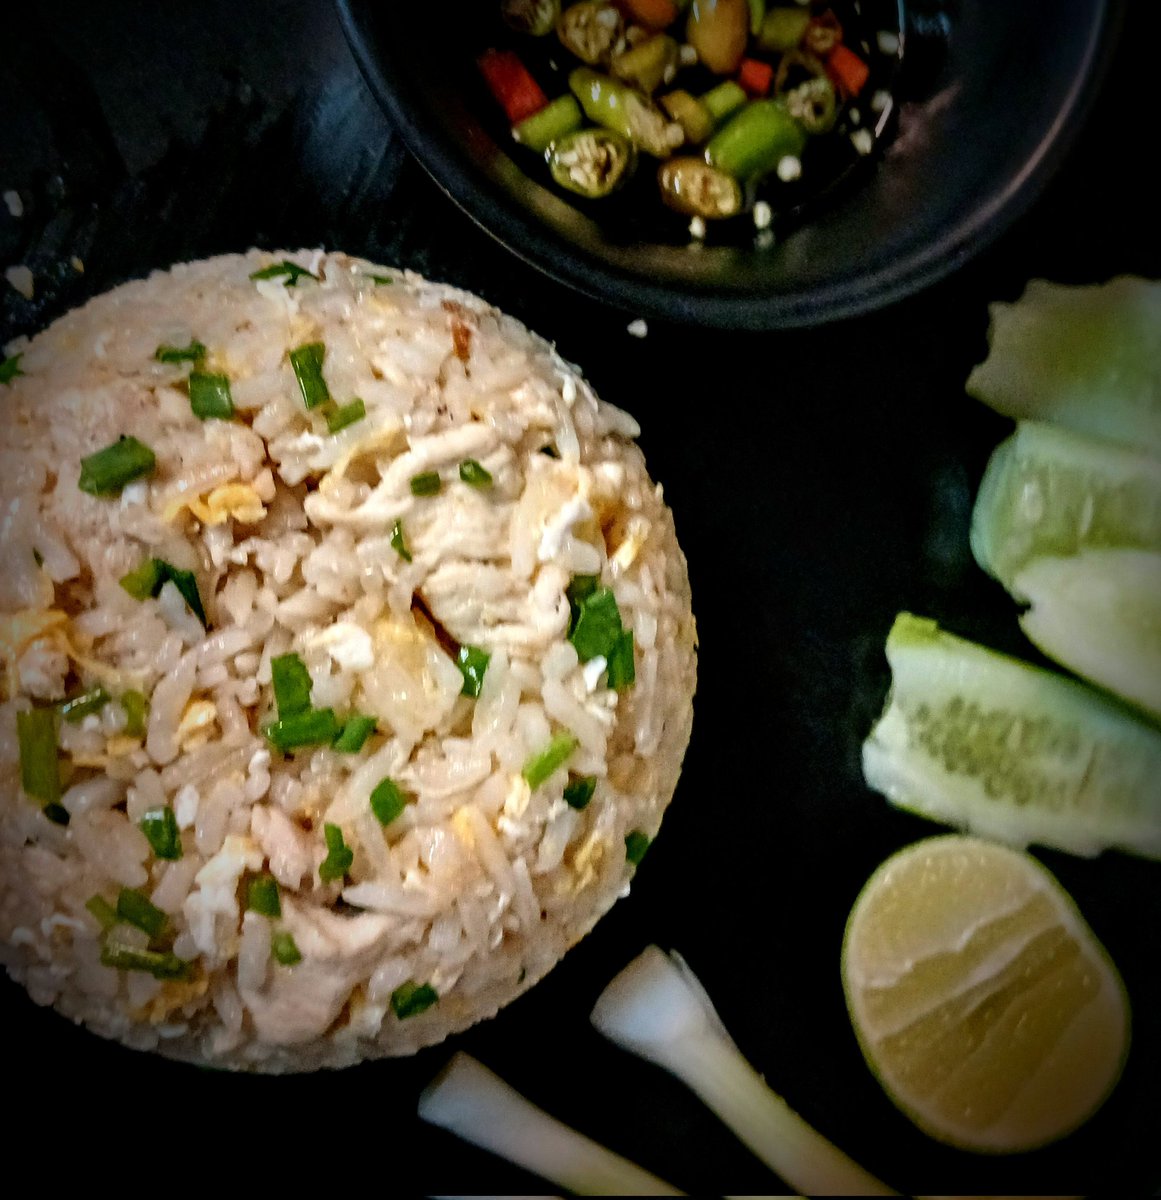 Chicken Fried Rice, Khao Pad Gai ข้าวผัดไก่
Simple Delicious 
#ข้าวผัดไก่ #friedrice #khaopadgai